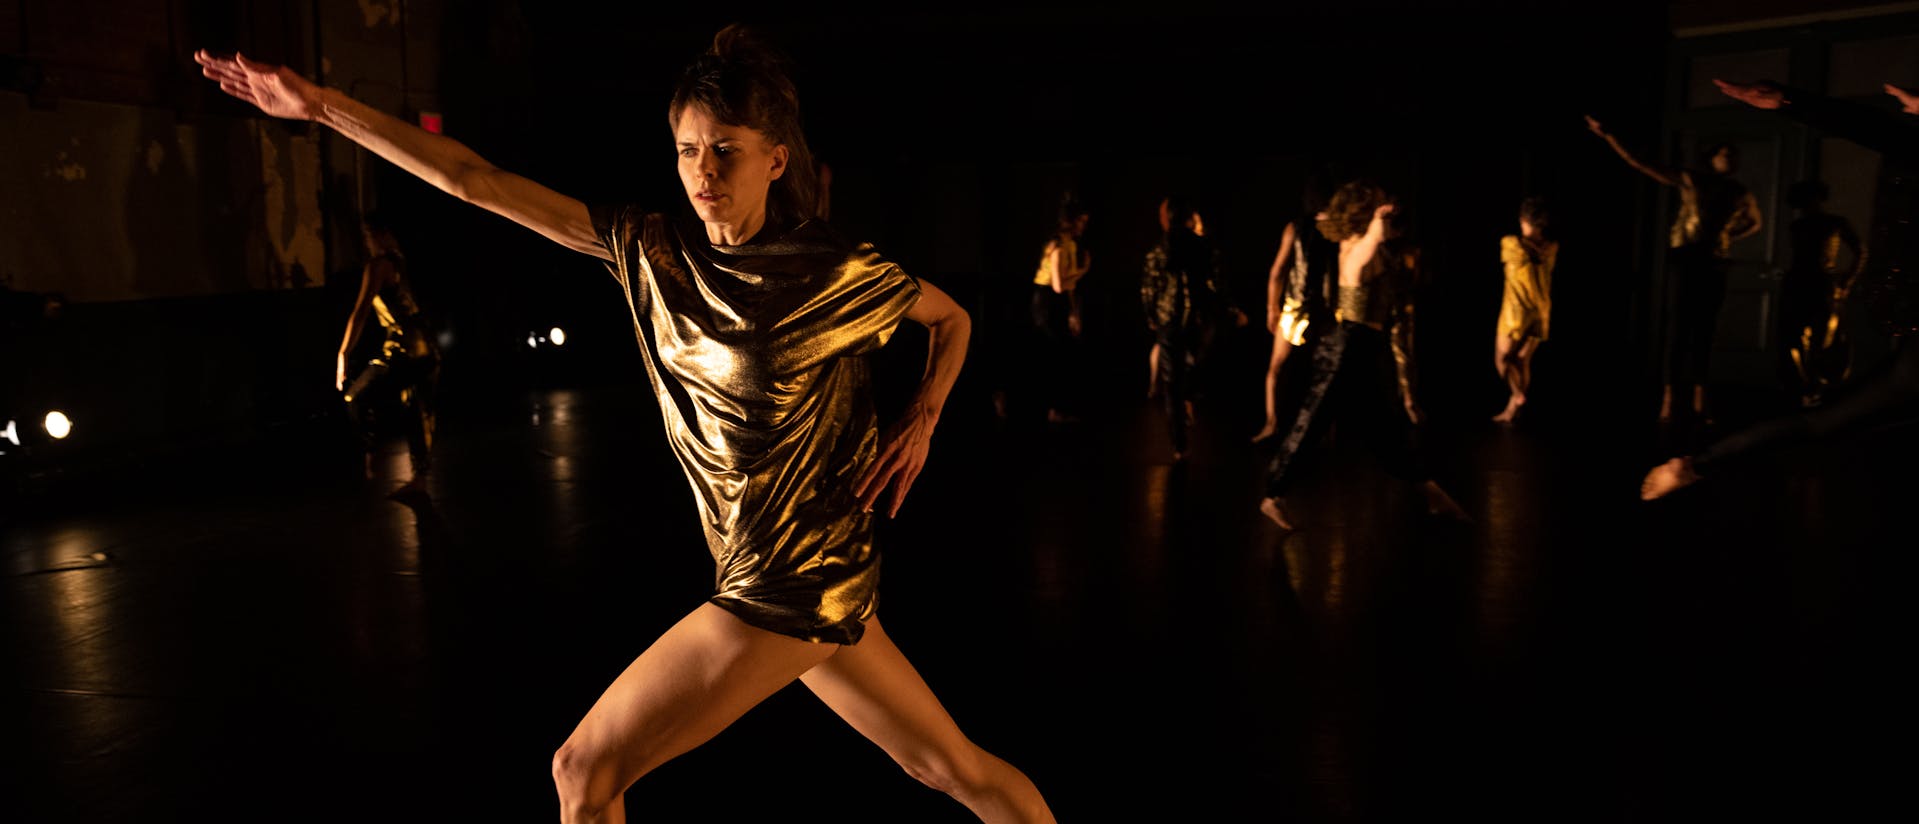 Joanna Kotze is centered as she performs on a dark stage with minimal yellow lighting, some dancers are visible in the far background behind her. She looks towards the left with concentration as she lunges forward on her left leg, hips pointing to the left. Her torso twists as her shoulders angle towards the camera. Her left arm is bent as her hand rests on her left hip, and her right arm is extended and reaches out and up to the left where she lunges, hand outstretched with her palm facing down. She wears a gold metallic shortsleeved tunic.